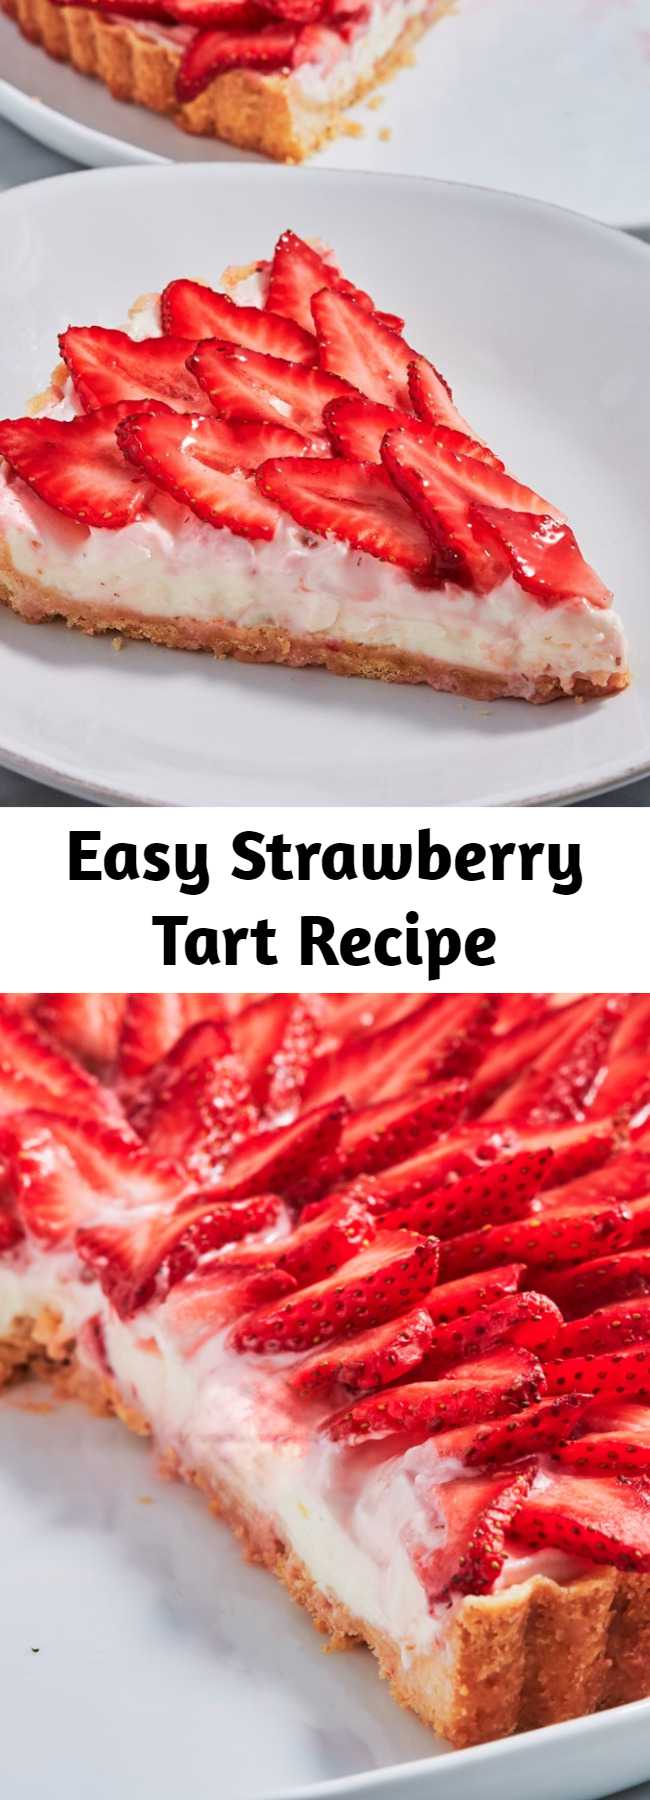 Easy Strawberry Tart Recipe - Nothing says spring quite like this easy strawberry tart. The crust is a simple no-chill version of a pie crust that we are obsessed with.